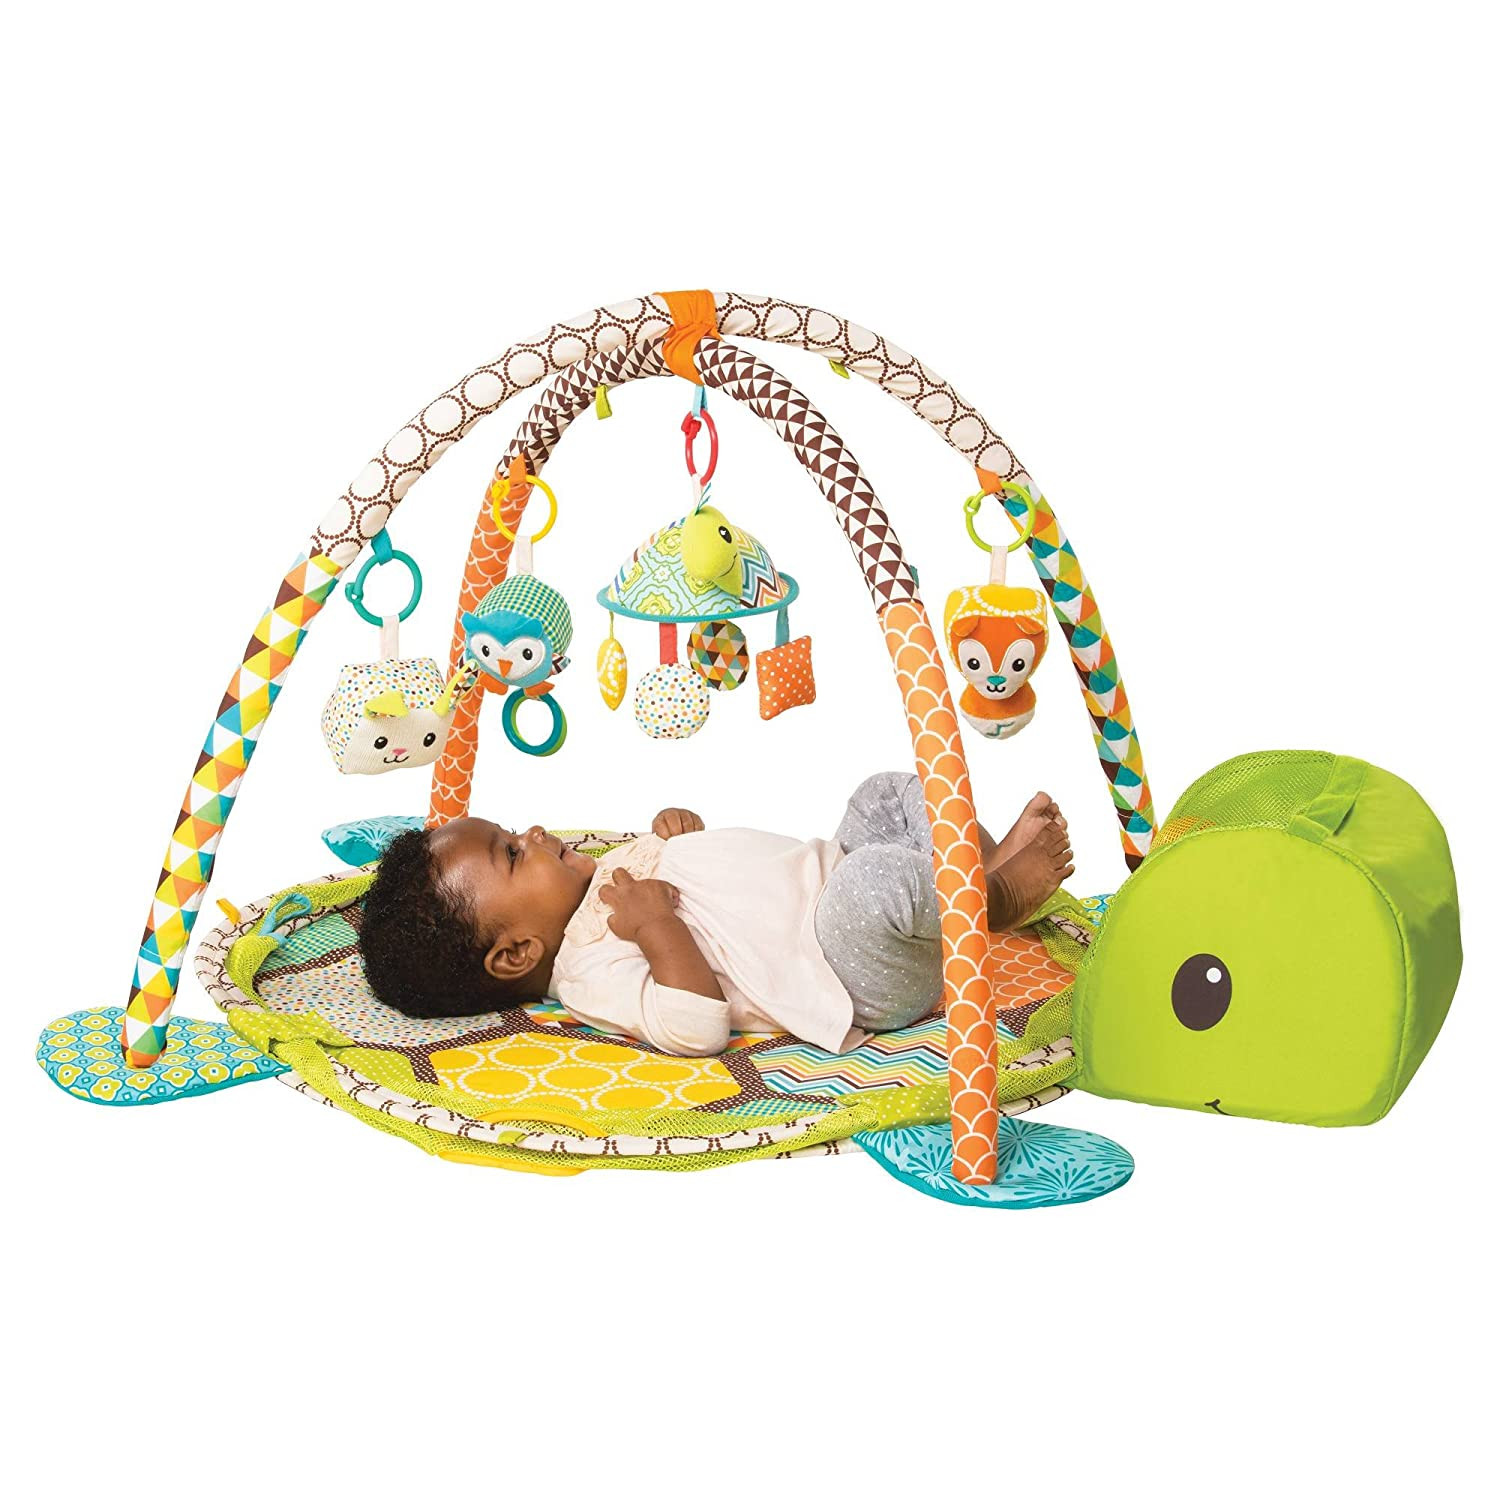 3 in 1 Activity gym and ball pit playmat